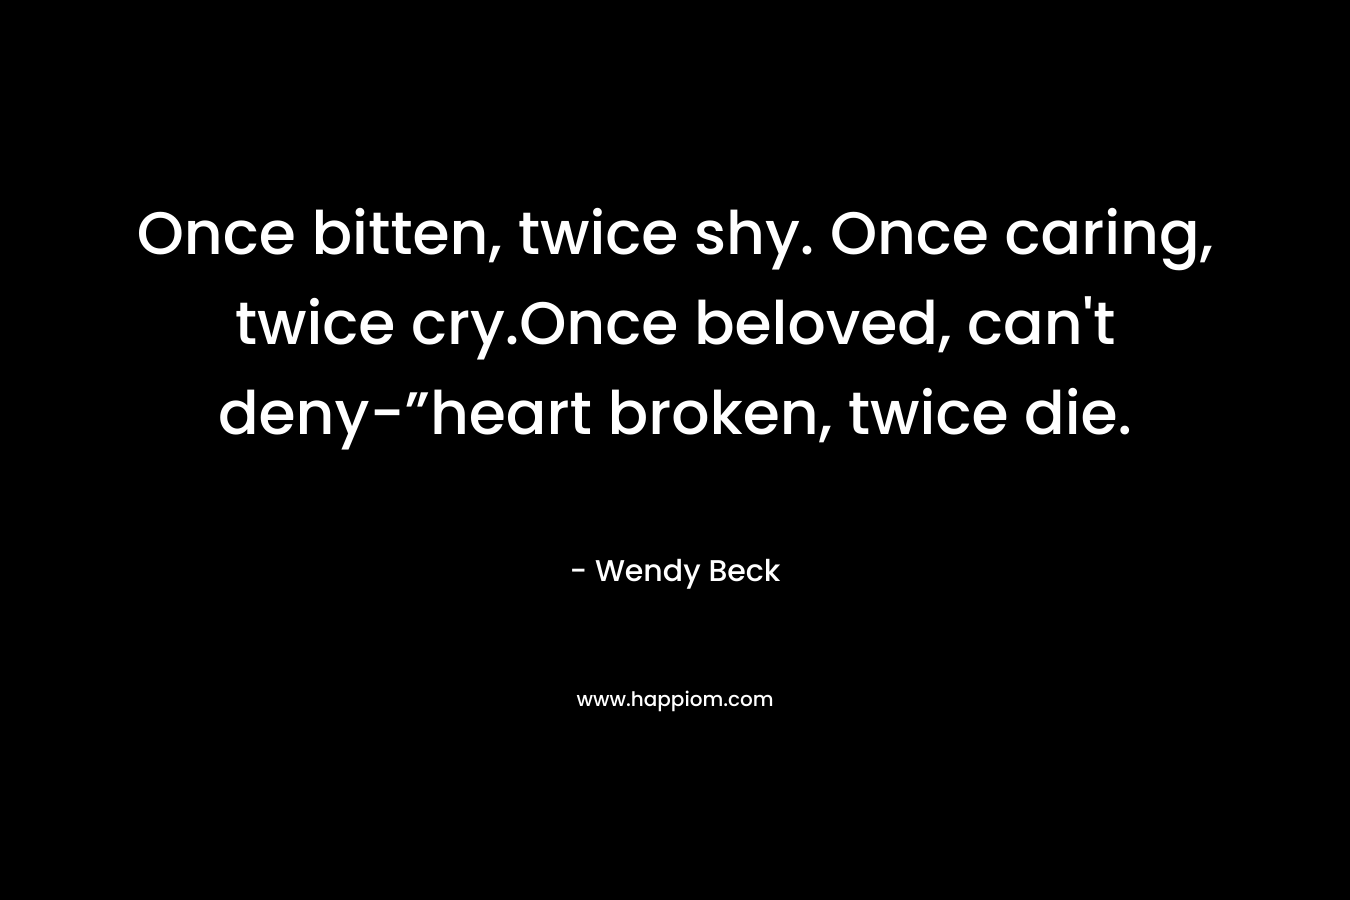 Once bitten, twice shy. Once caring, twice cry.Once beloved, can't deny-”heart broken, twice die.